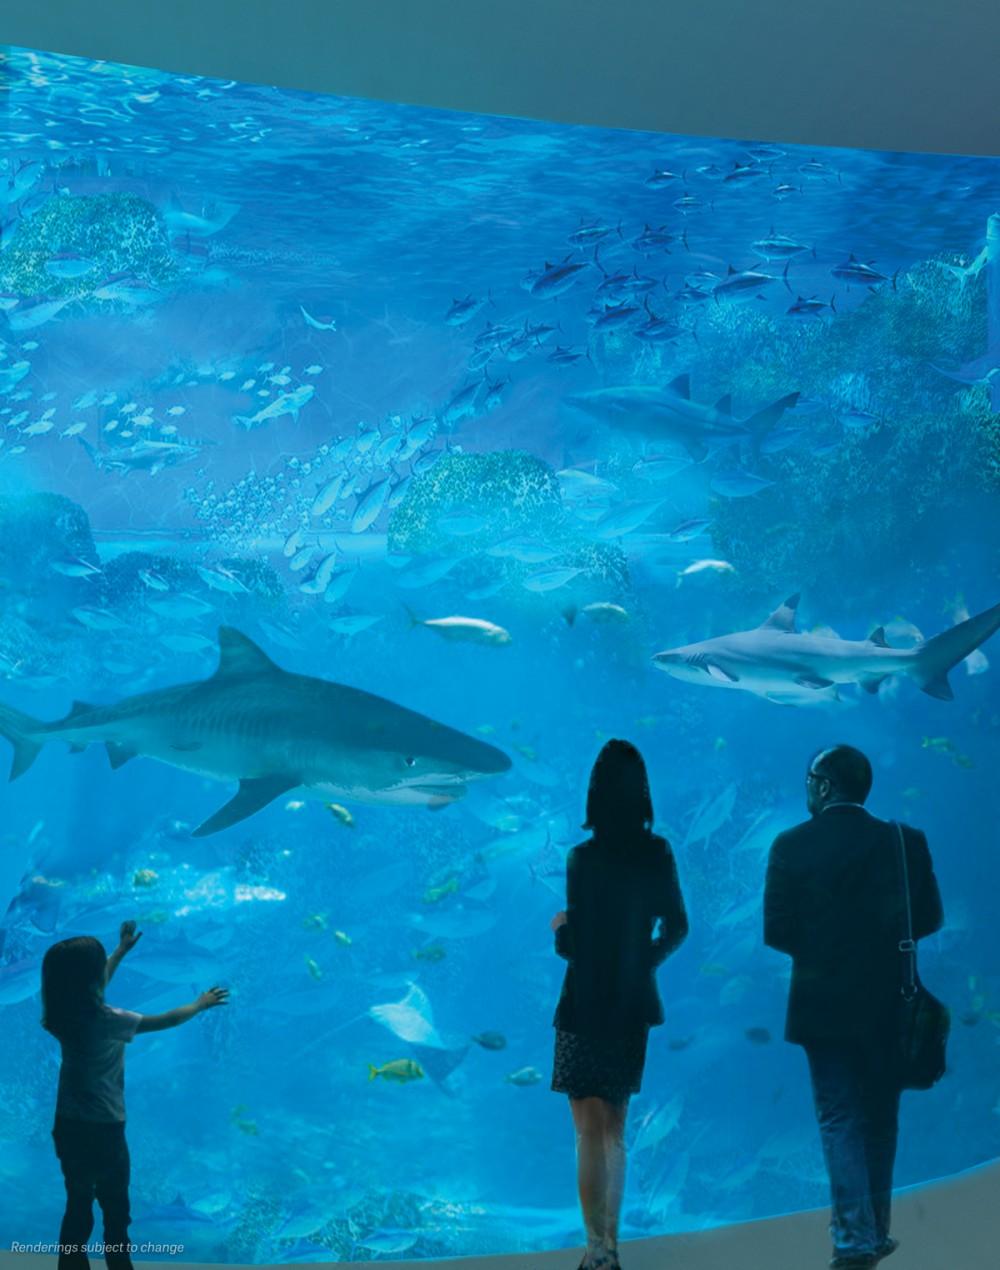 Aquatic creatures will be displayed across 3.8 million litres of water